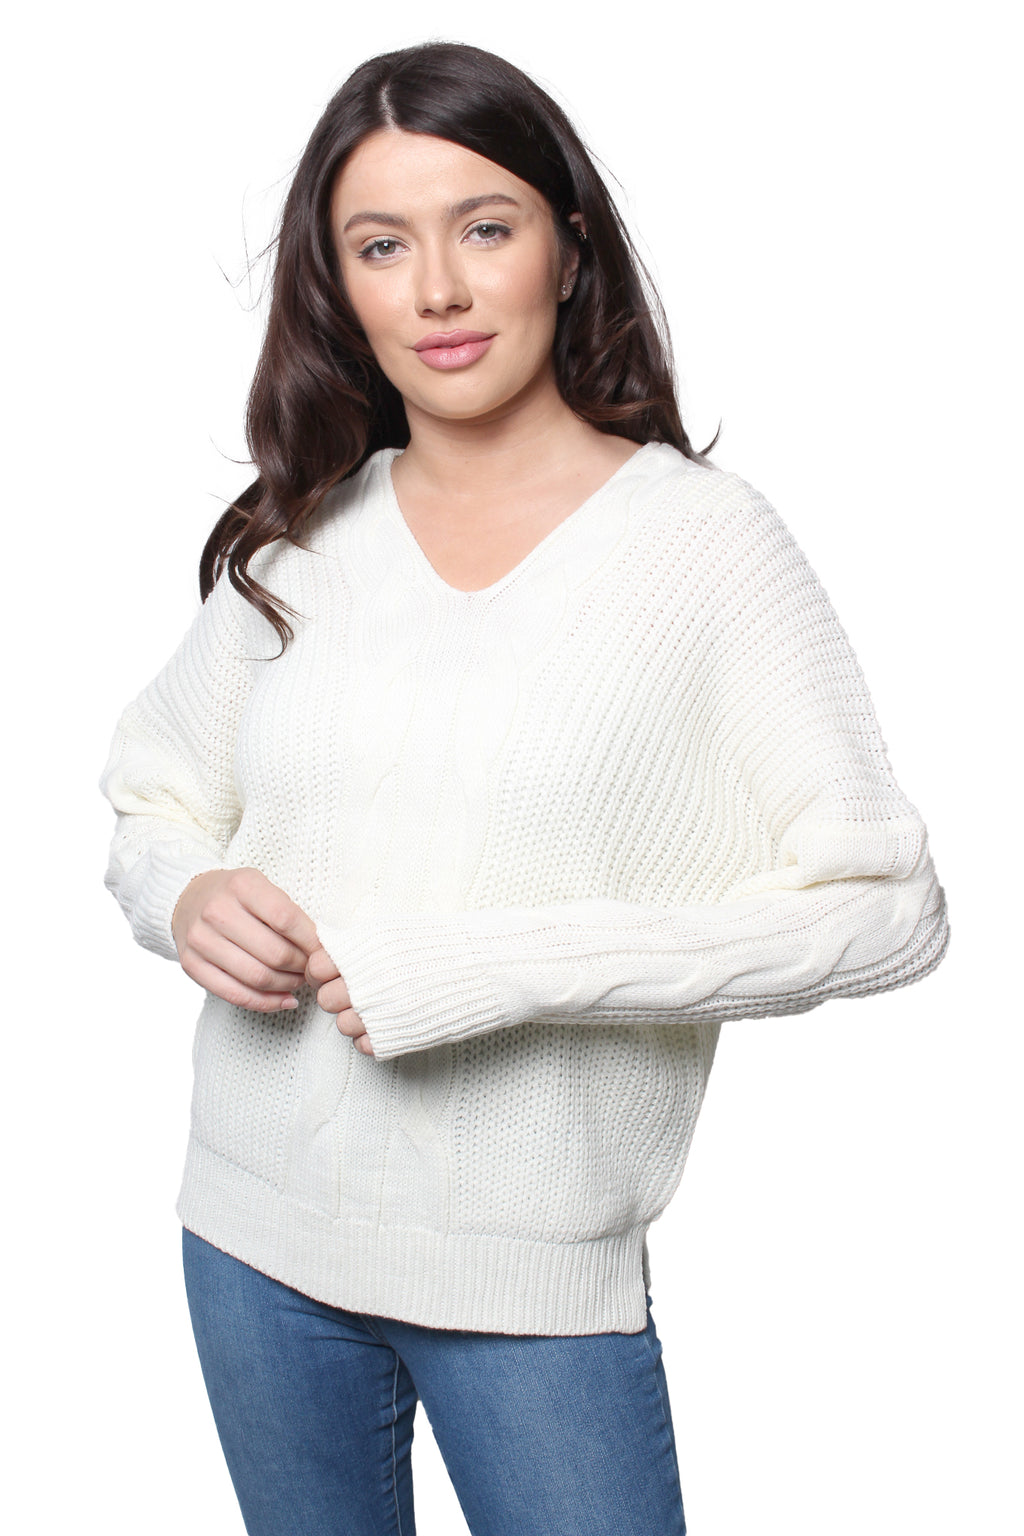 Women's Double V Neck Long Sleeve Cable Knit Sweater